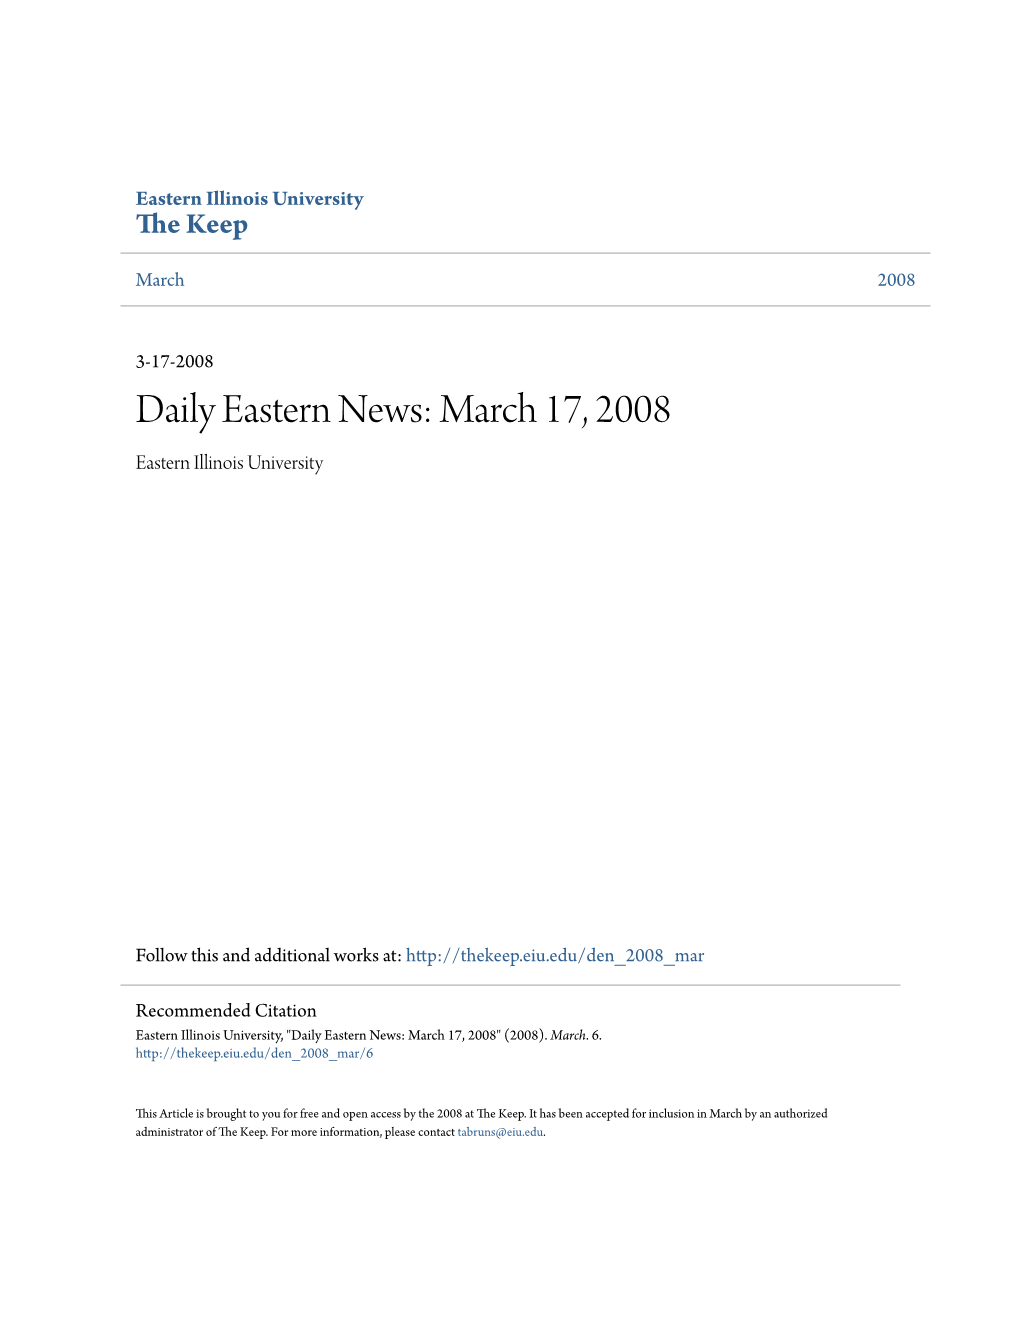 Daily Eastern News: March 17, 2008 Eastern Illinois University